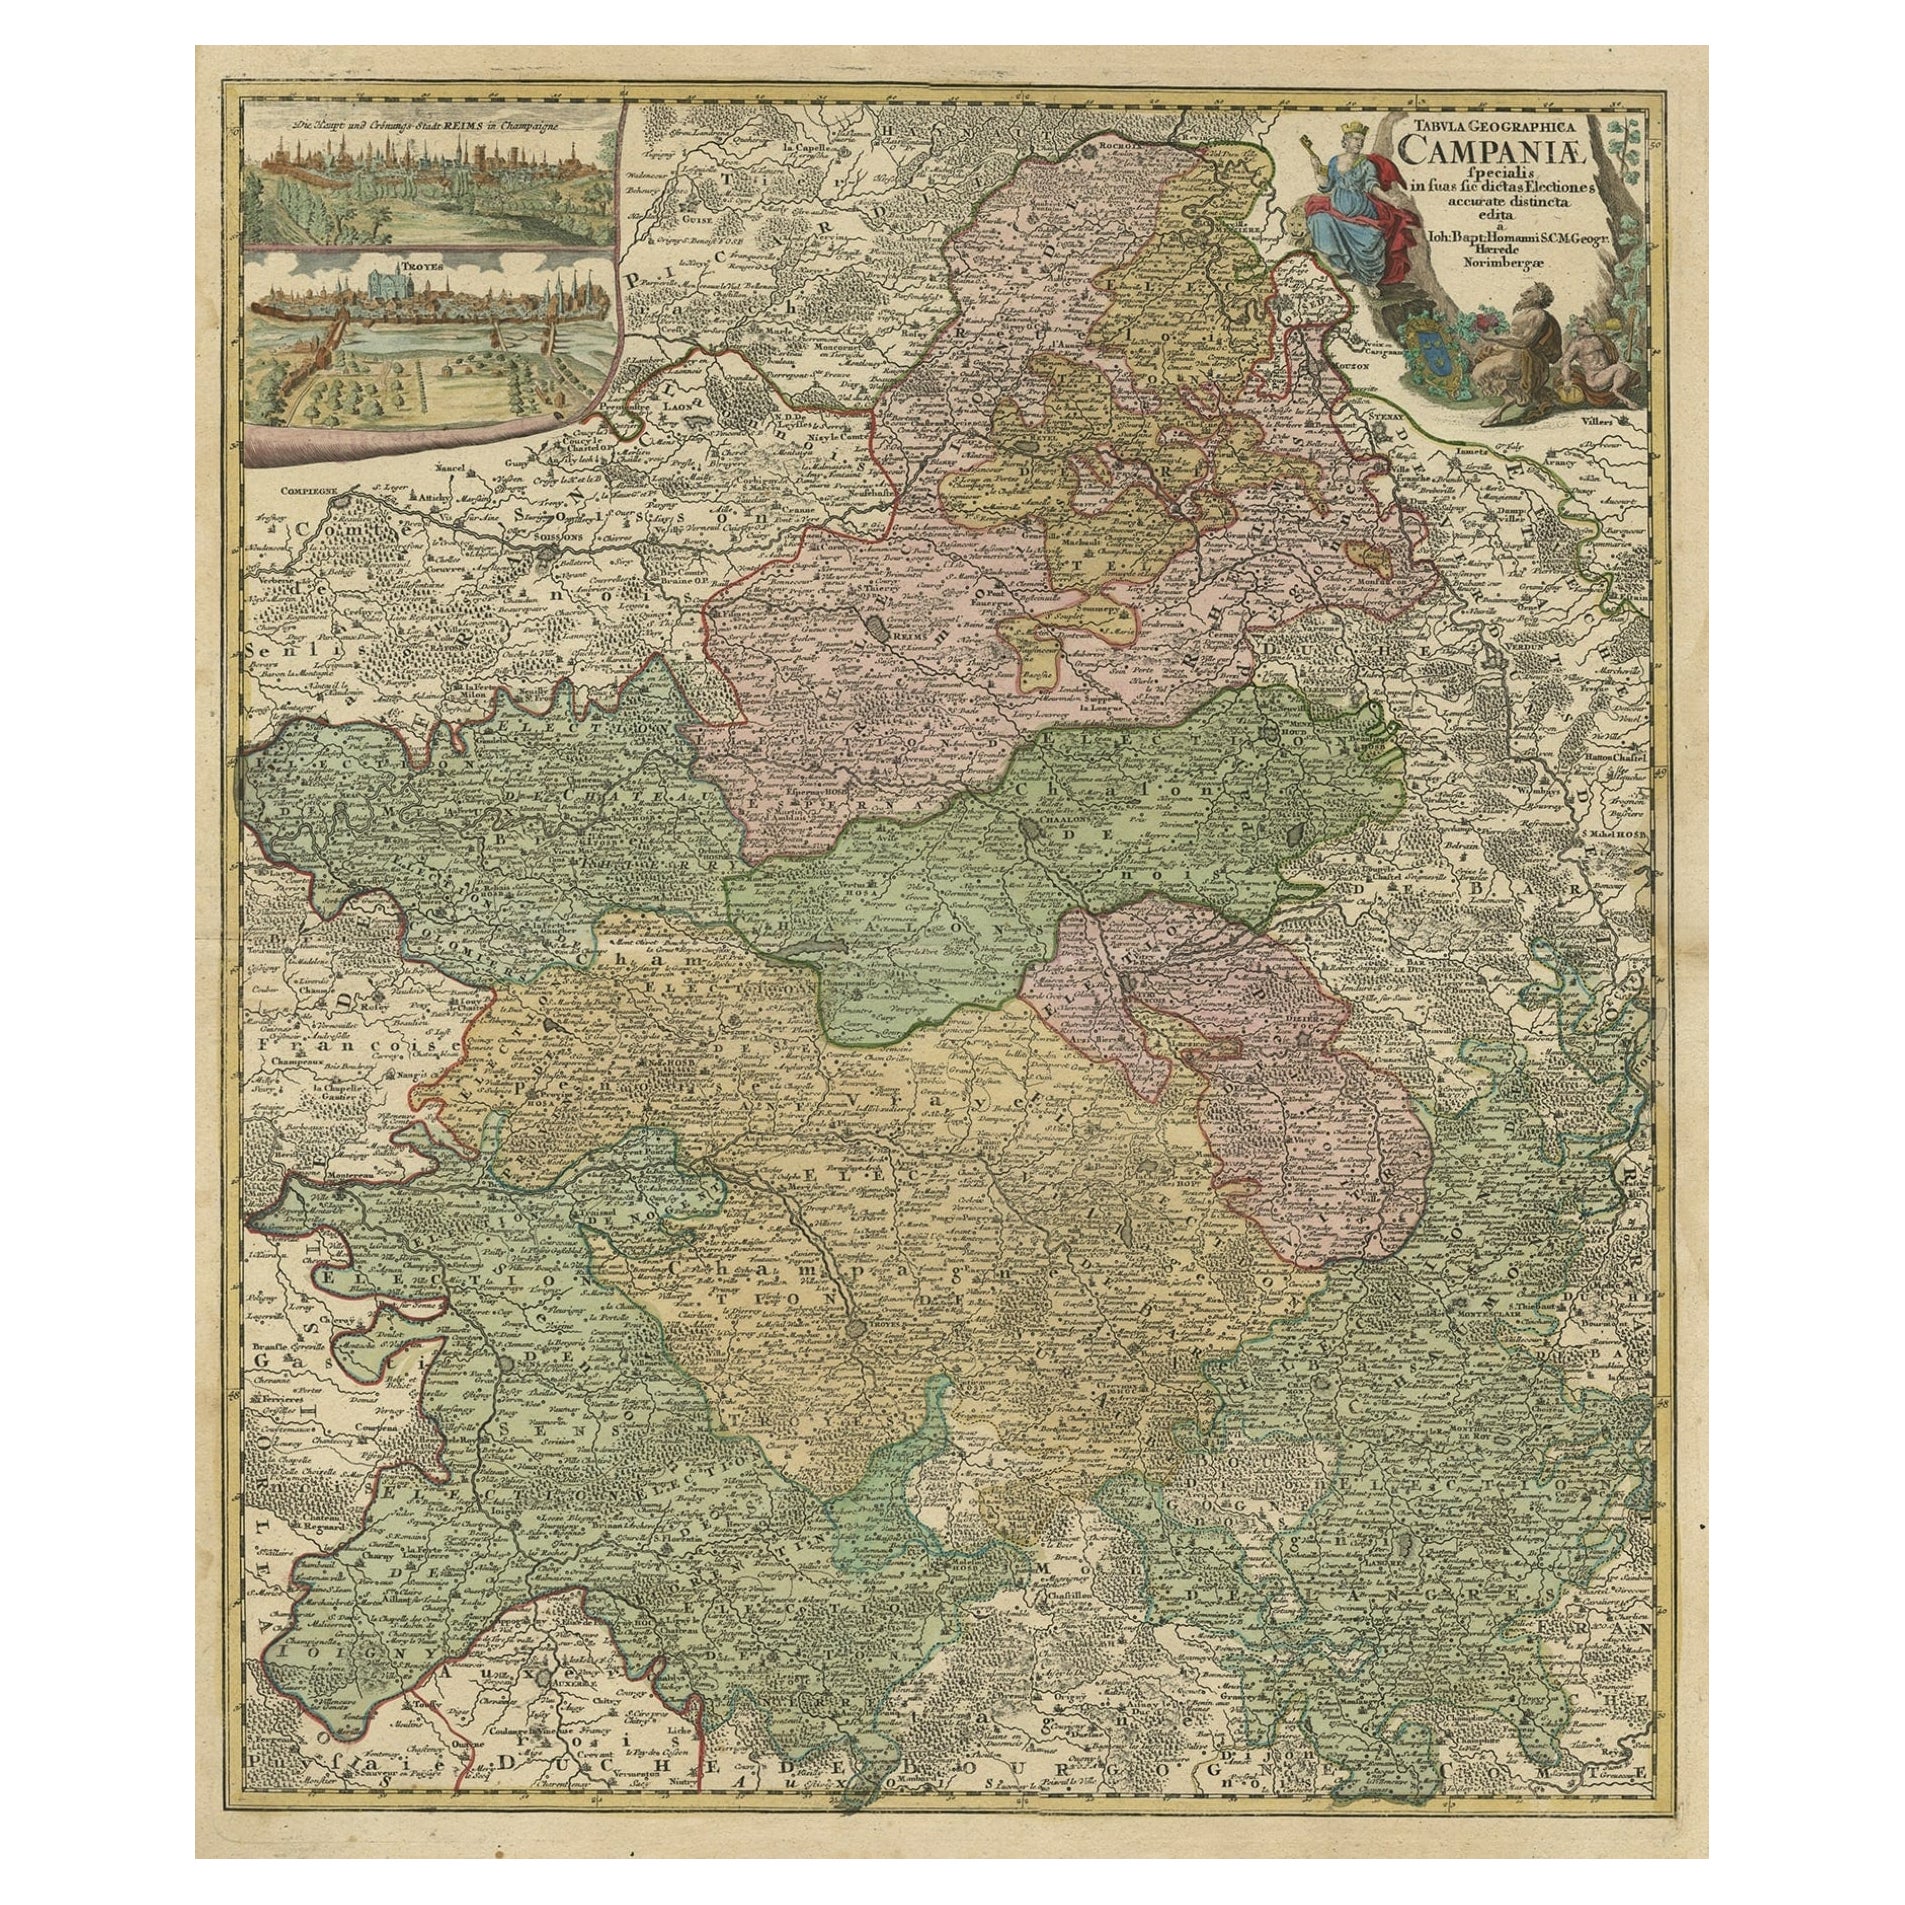 Old Map of Region Champagne-Ardenne with Reims, Troyes & Épernay in France, 1759 For Sale